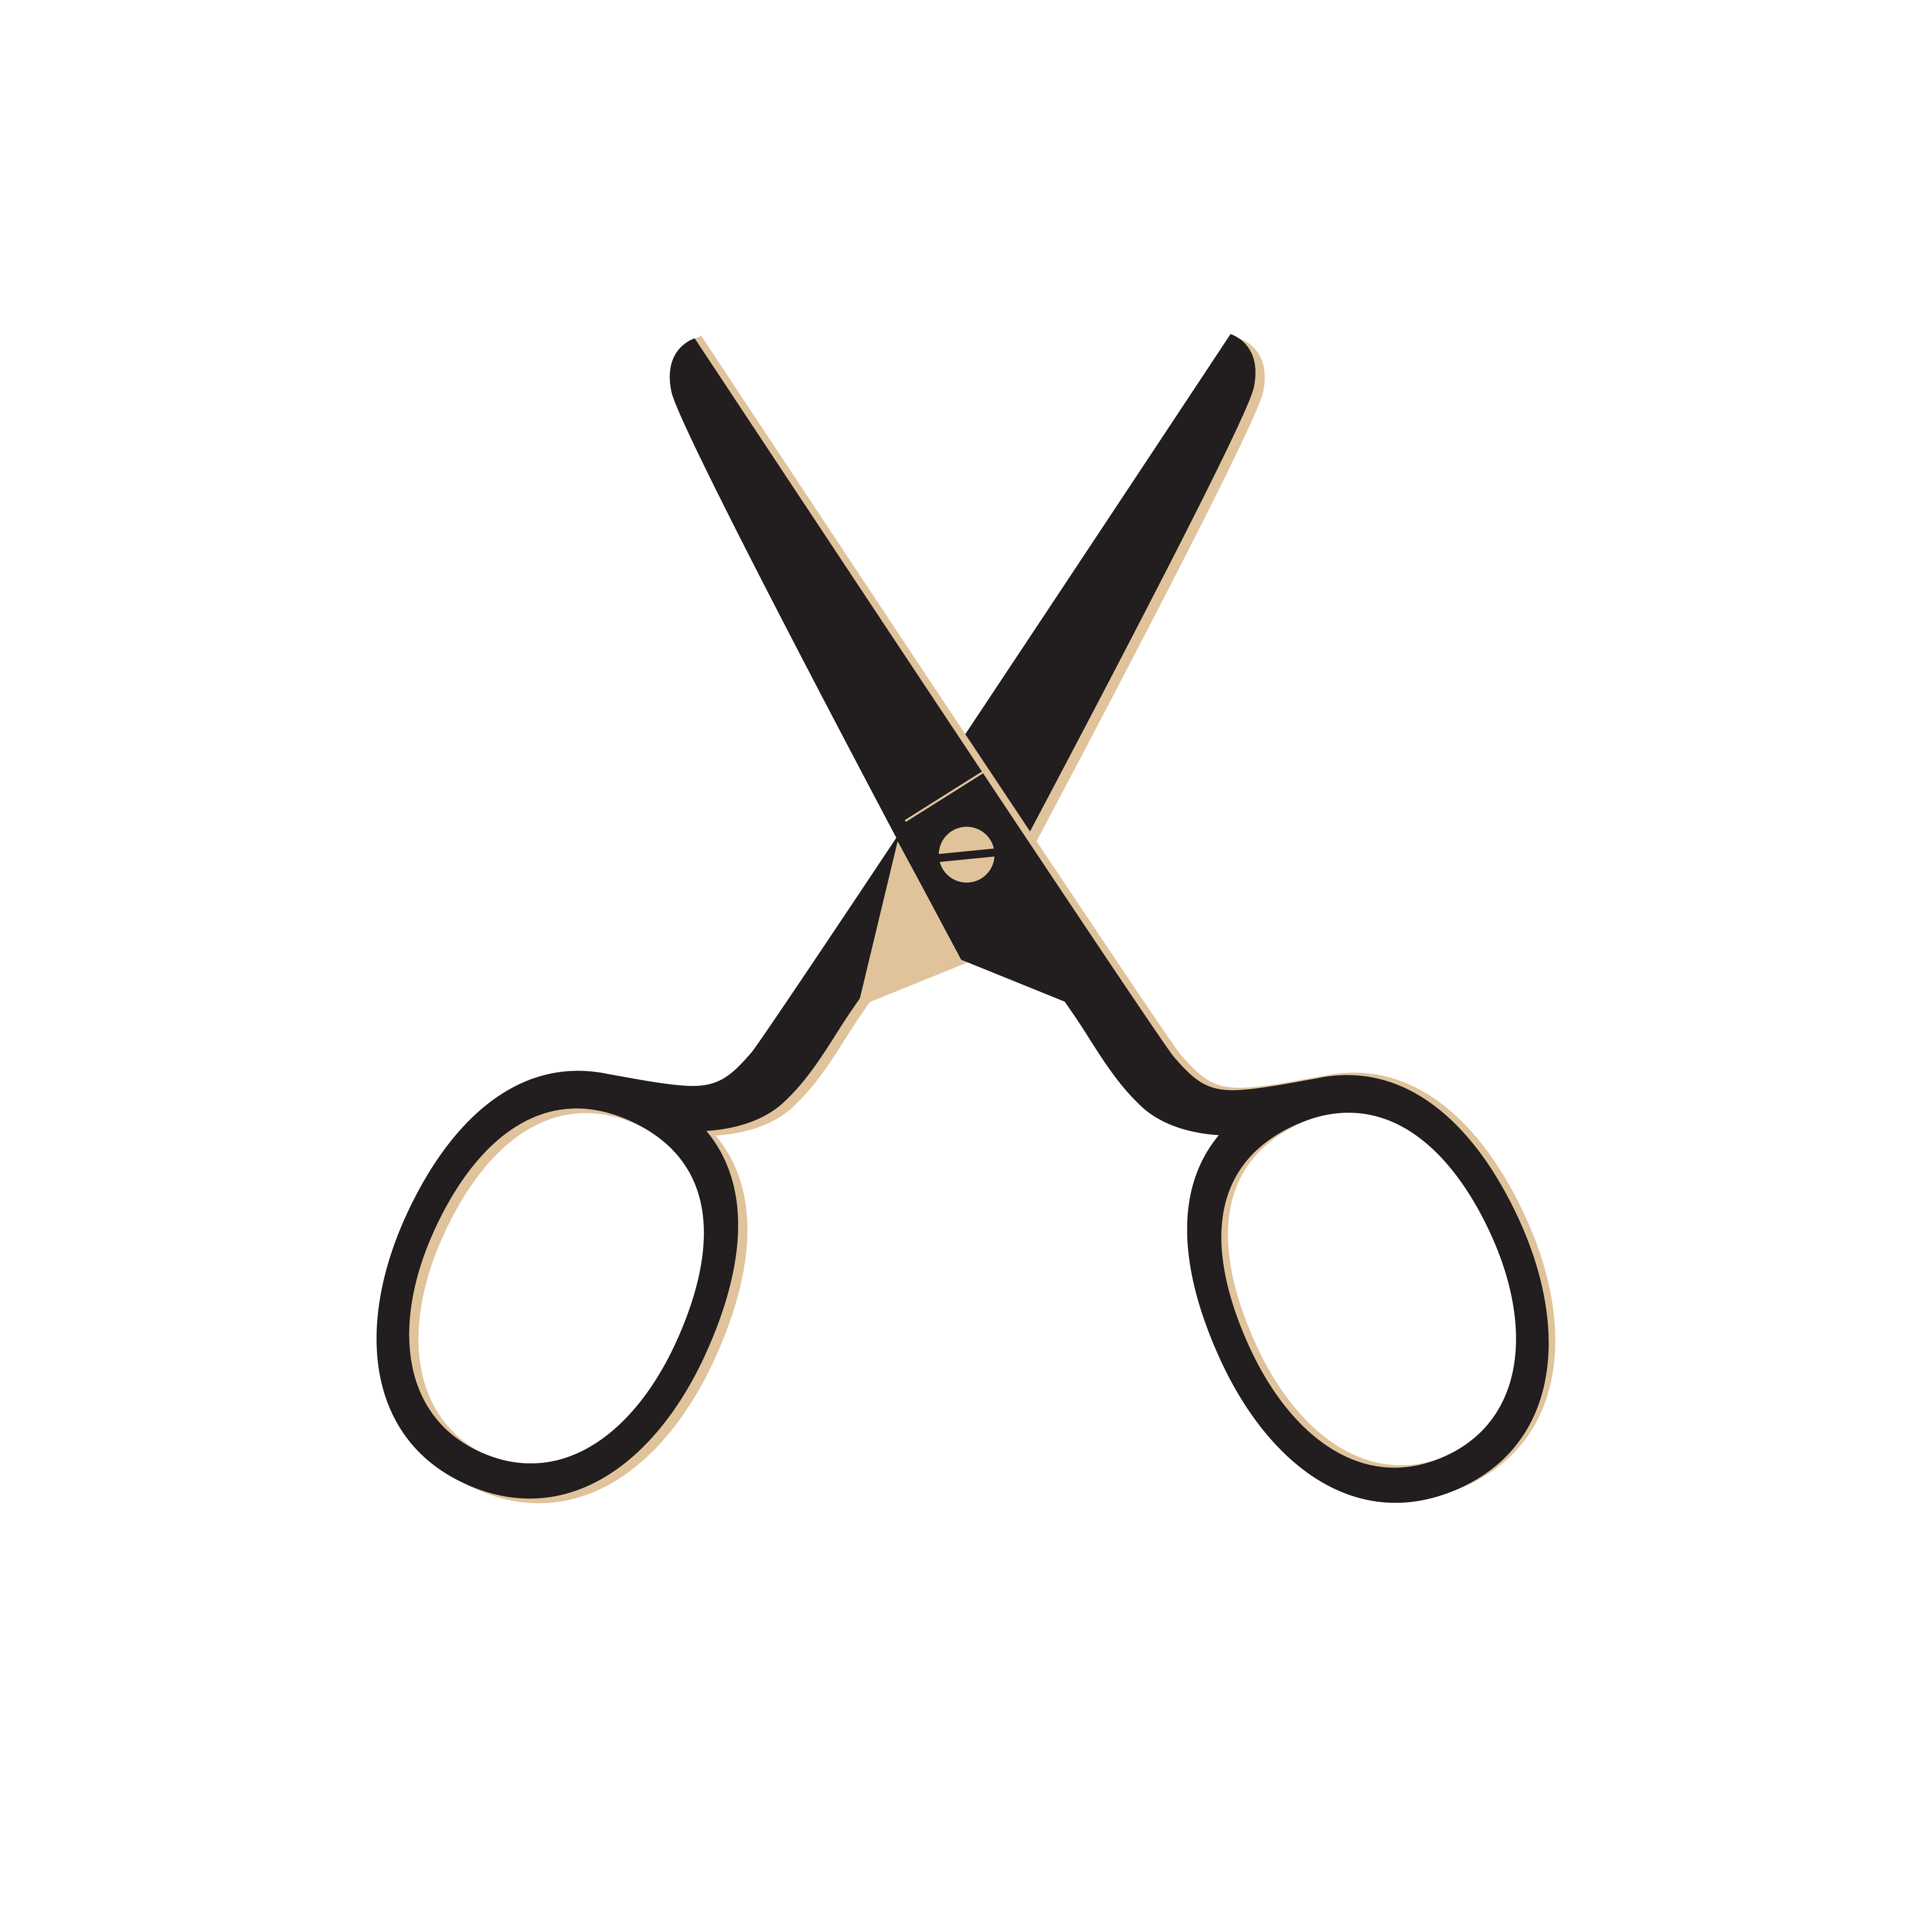 sewing scissors clipart page